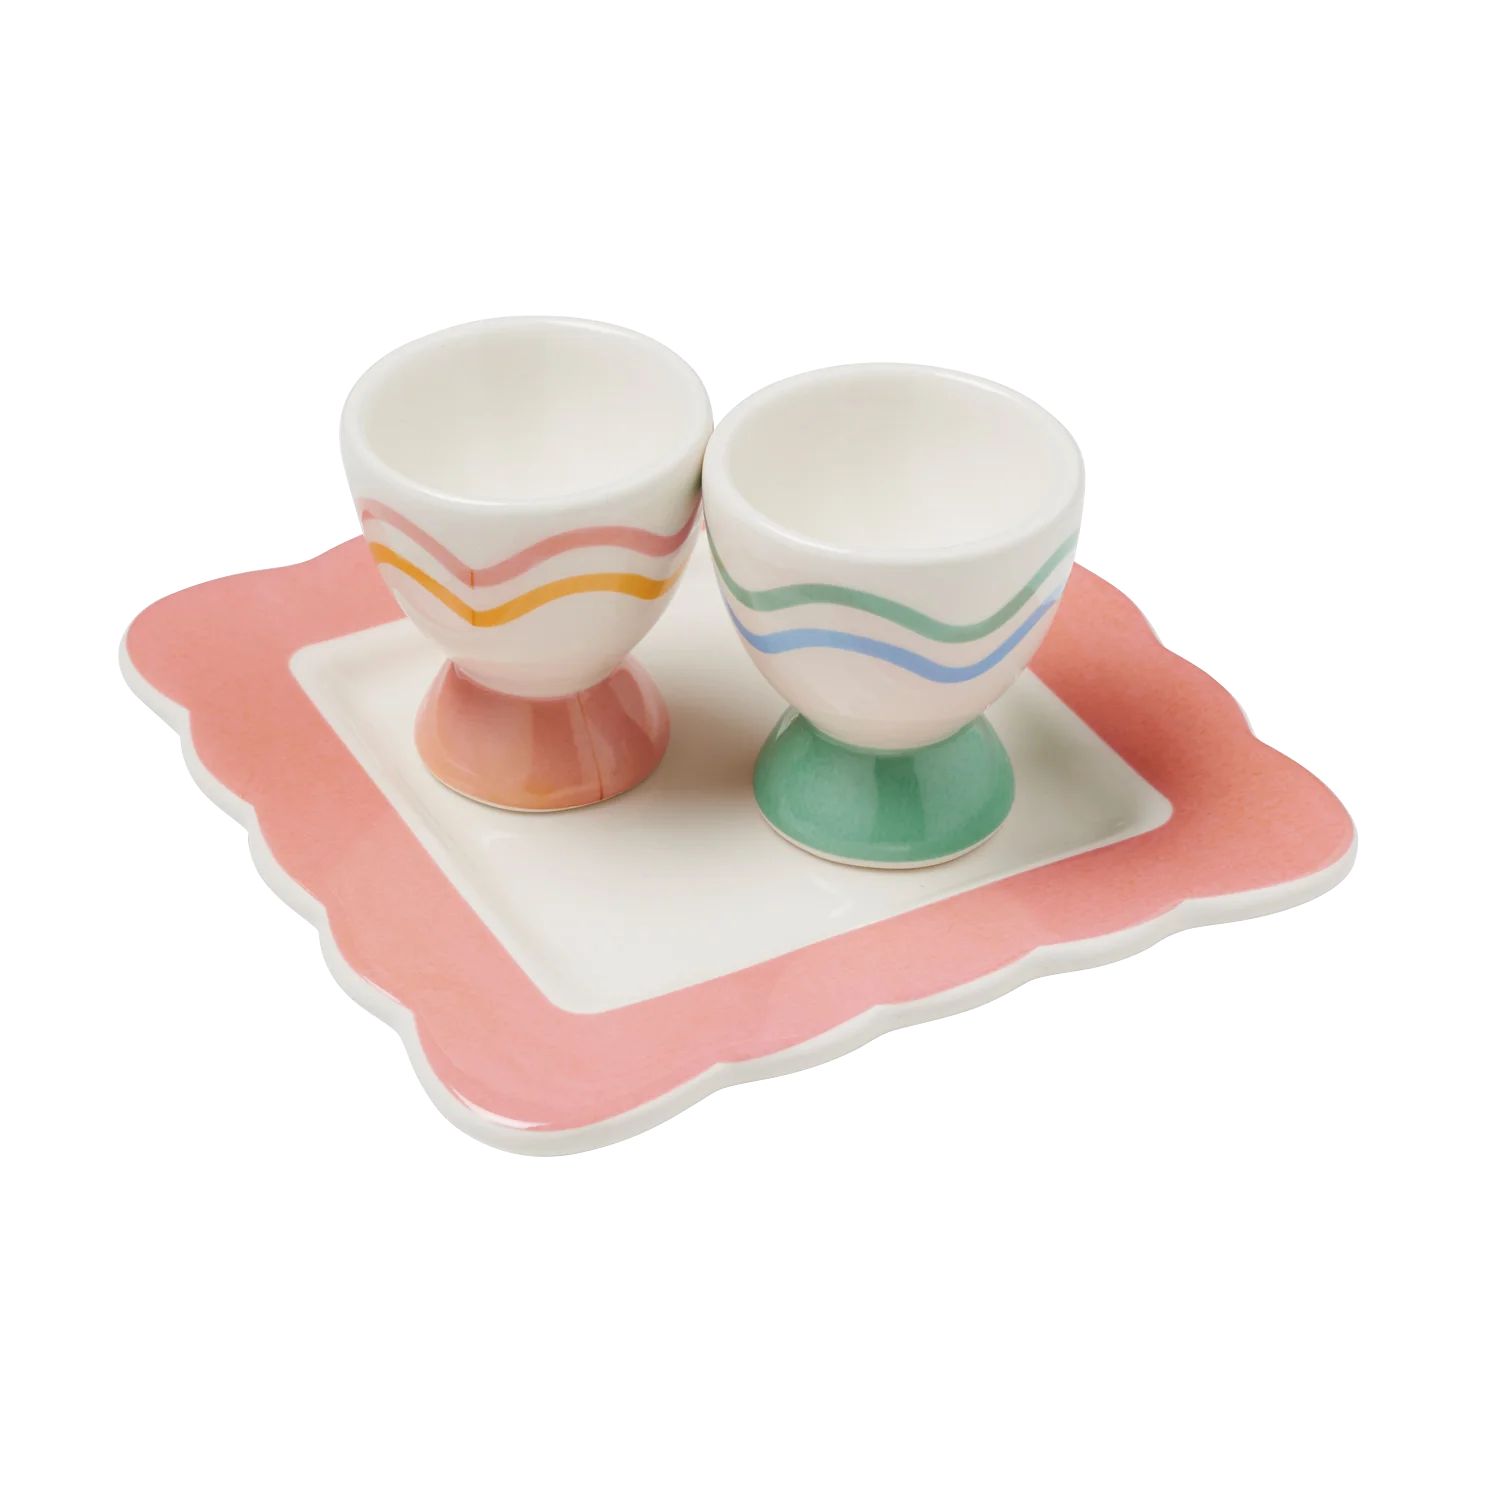 Wavy Egg Cup Set | In the Roundhouse